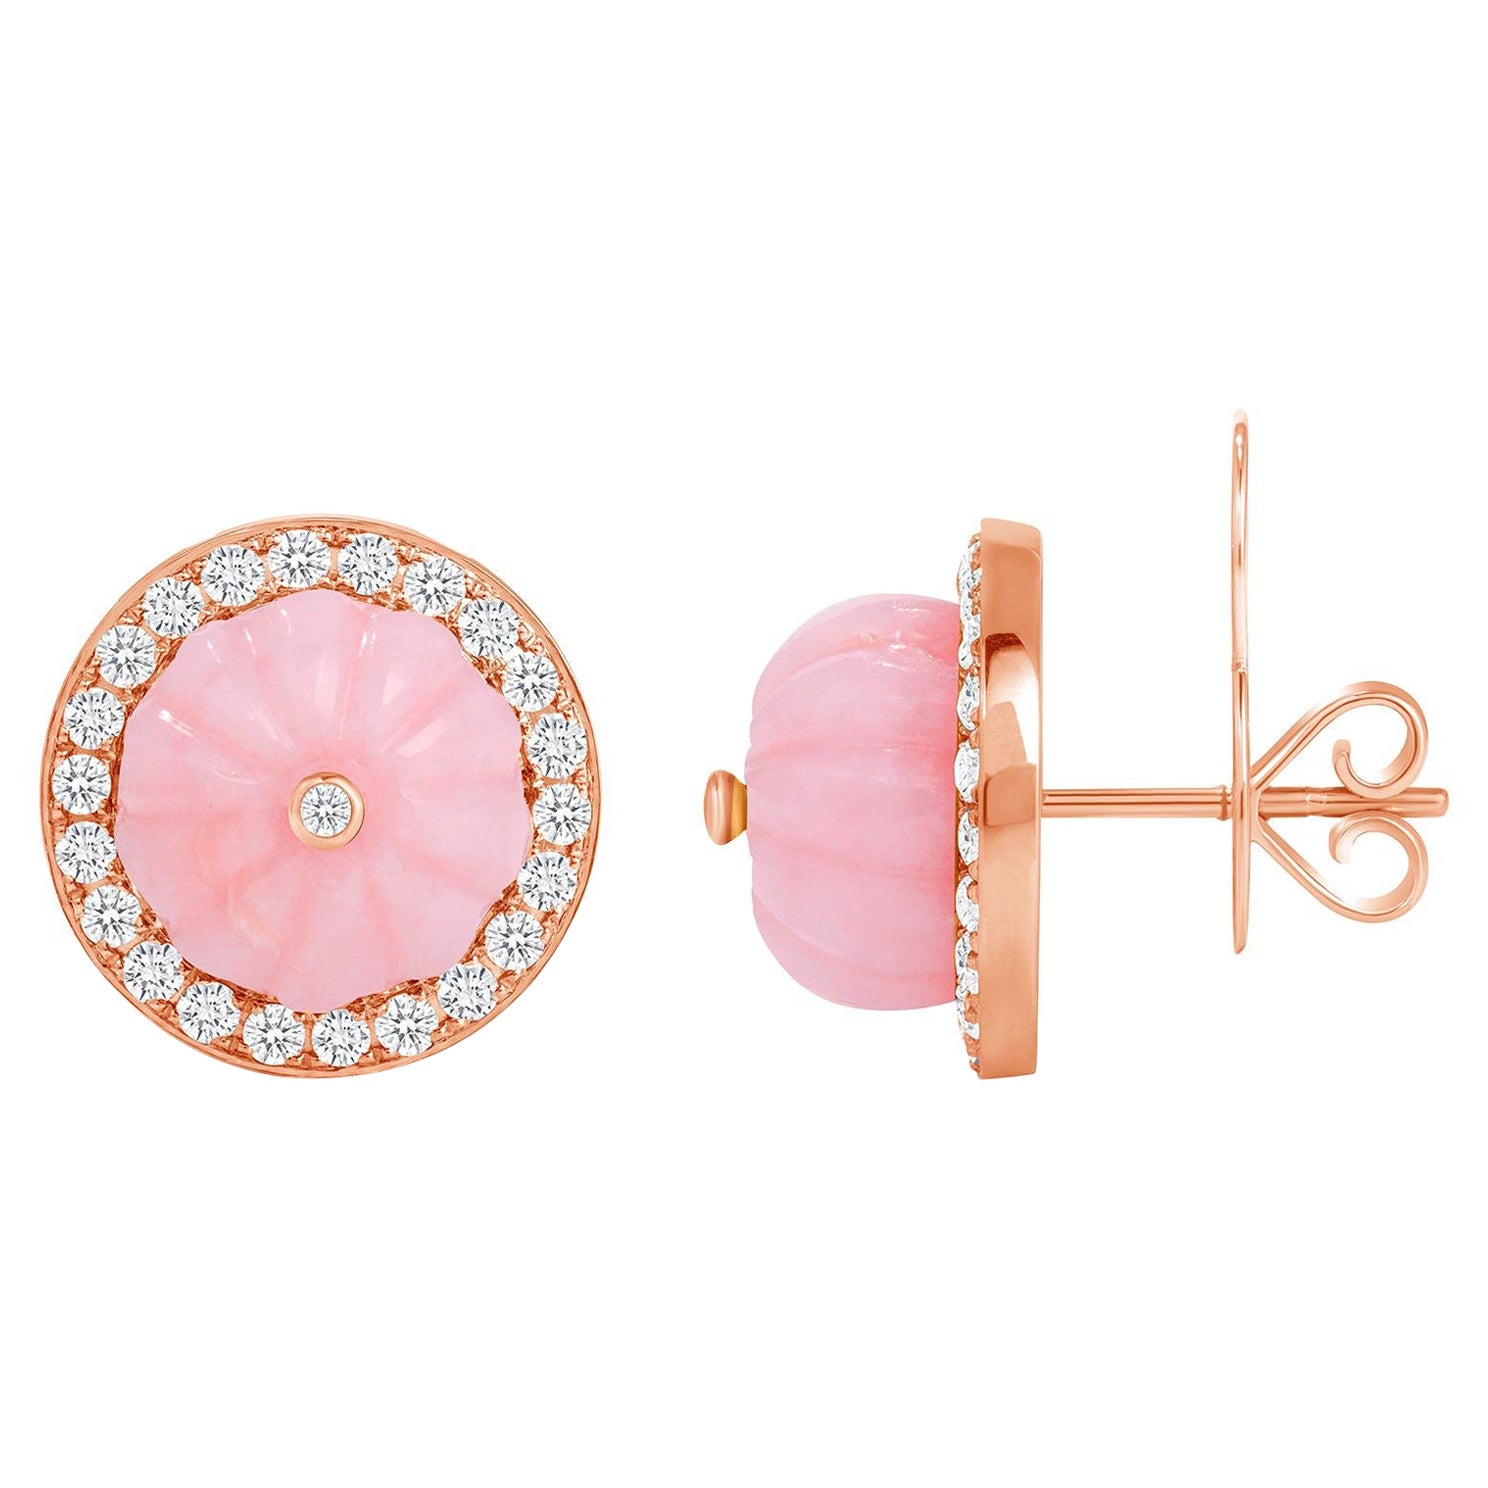 14K Rose Gold Lux Art Deco Lux Diamond & Carved Pink Opal Earring For Sale